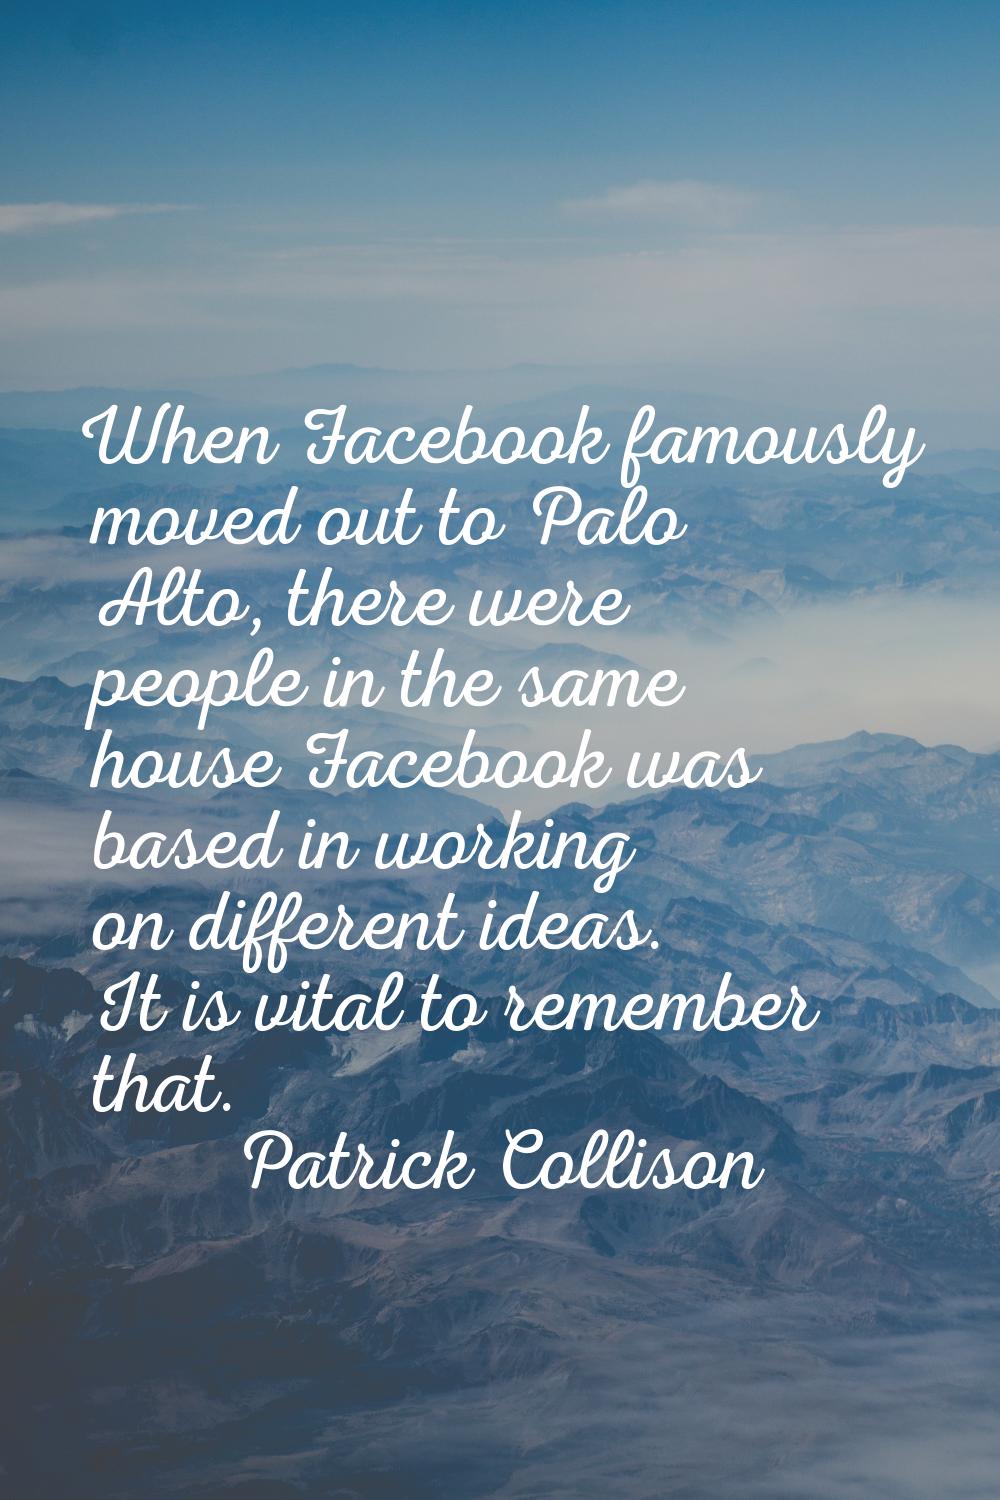 When Facebook famously moved out to Palo Alto, there were people in the same house Facebook was bas